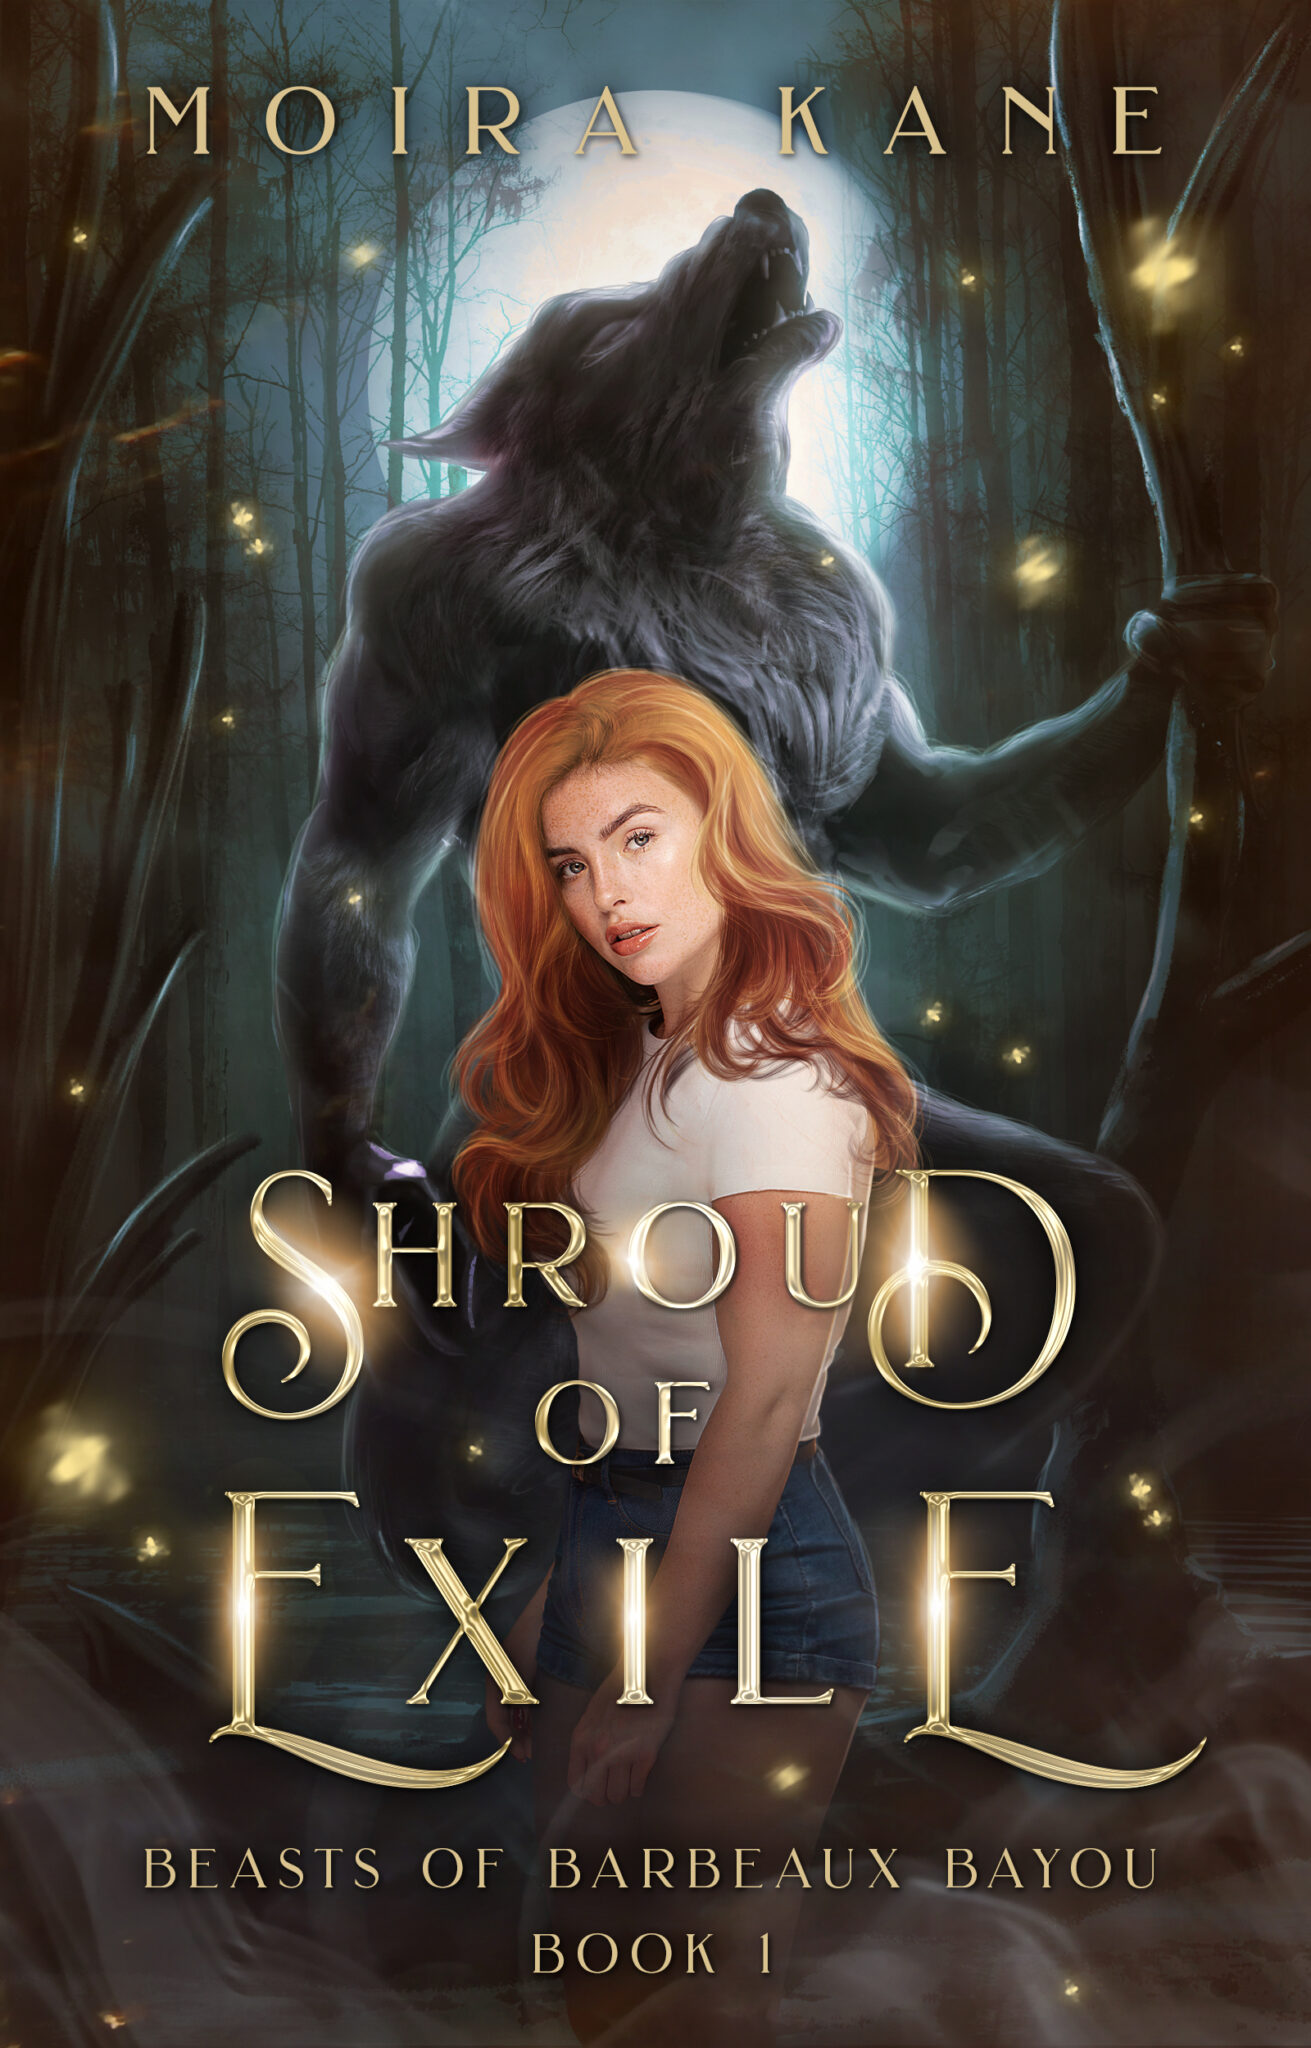 Woman standing in a swamp with a werewolf behind her. Fireflies in the foreground. Full moon in the background. Image text reads Shroud of Exile by Moira Kane